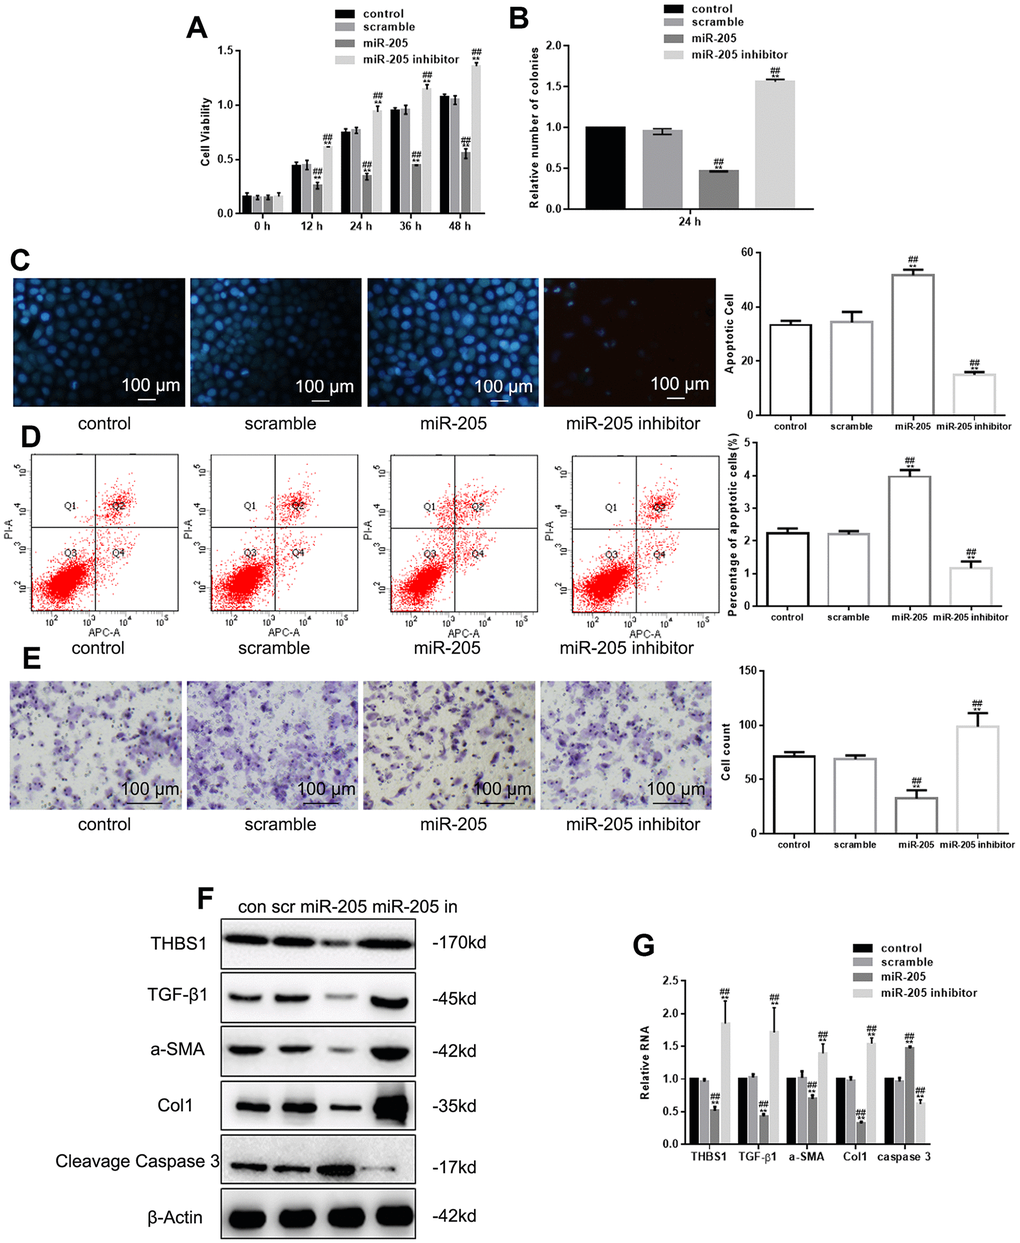 miR-205 inhibits growth and migration of hypertrophic scar fibroblasts. (A, B) The viability of cells deprived miR-205 or expressing miR-205 was measured by MTT and colony formation assay. **P C, D) The apoptosis of cells deprived miR-205 or expressing miR-205 was measured by Hoechst 33258 assay and Annexin V-PI assay. **P E) The migration of cells deprived miR-205 or expressing miR-205 was measured by Transwell assay. **P F, G) THBS1, TGF-β1, α-SMA, Col1, and Cleavage Caspase 3 expression was detected. Cells were transfected with control, scramble, miR-205, and miR-205 inhibitor, respectively. **P 